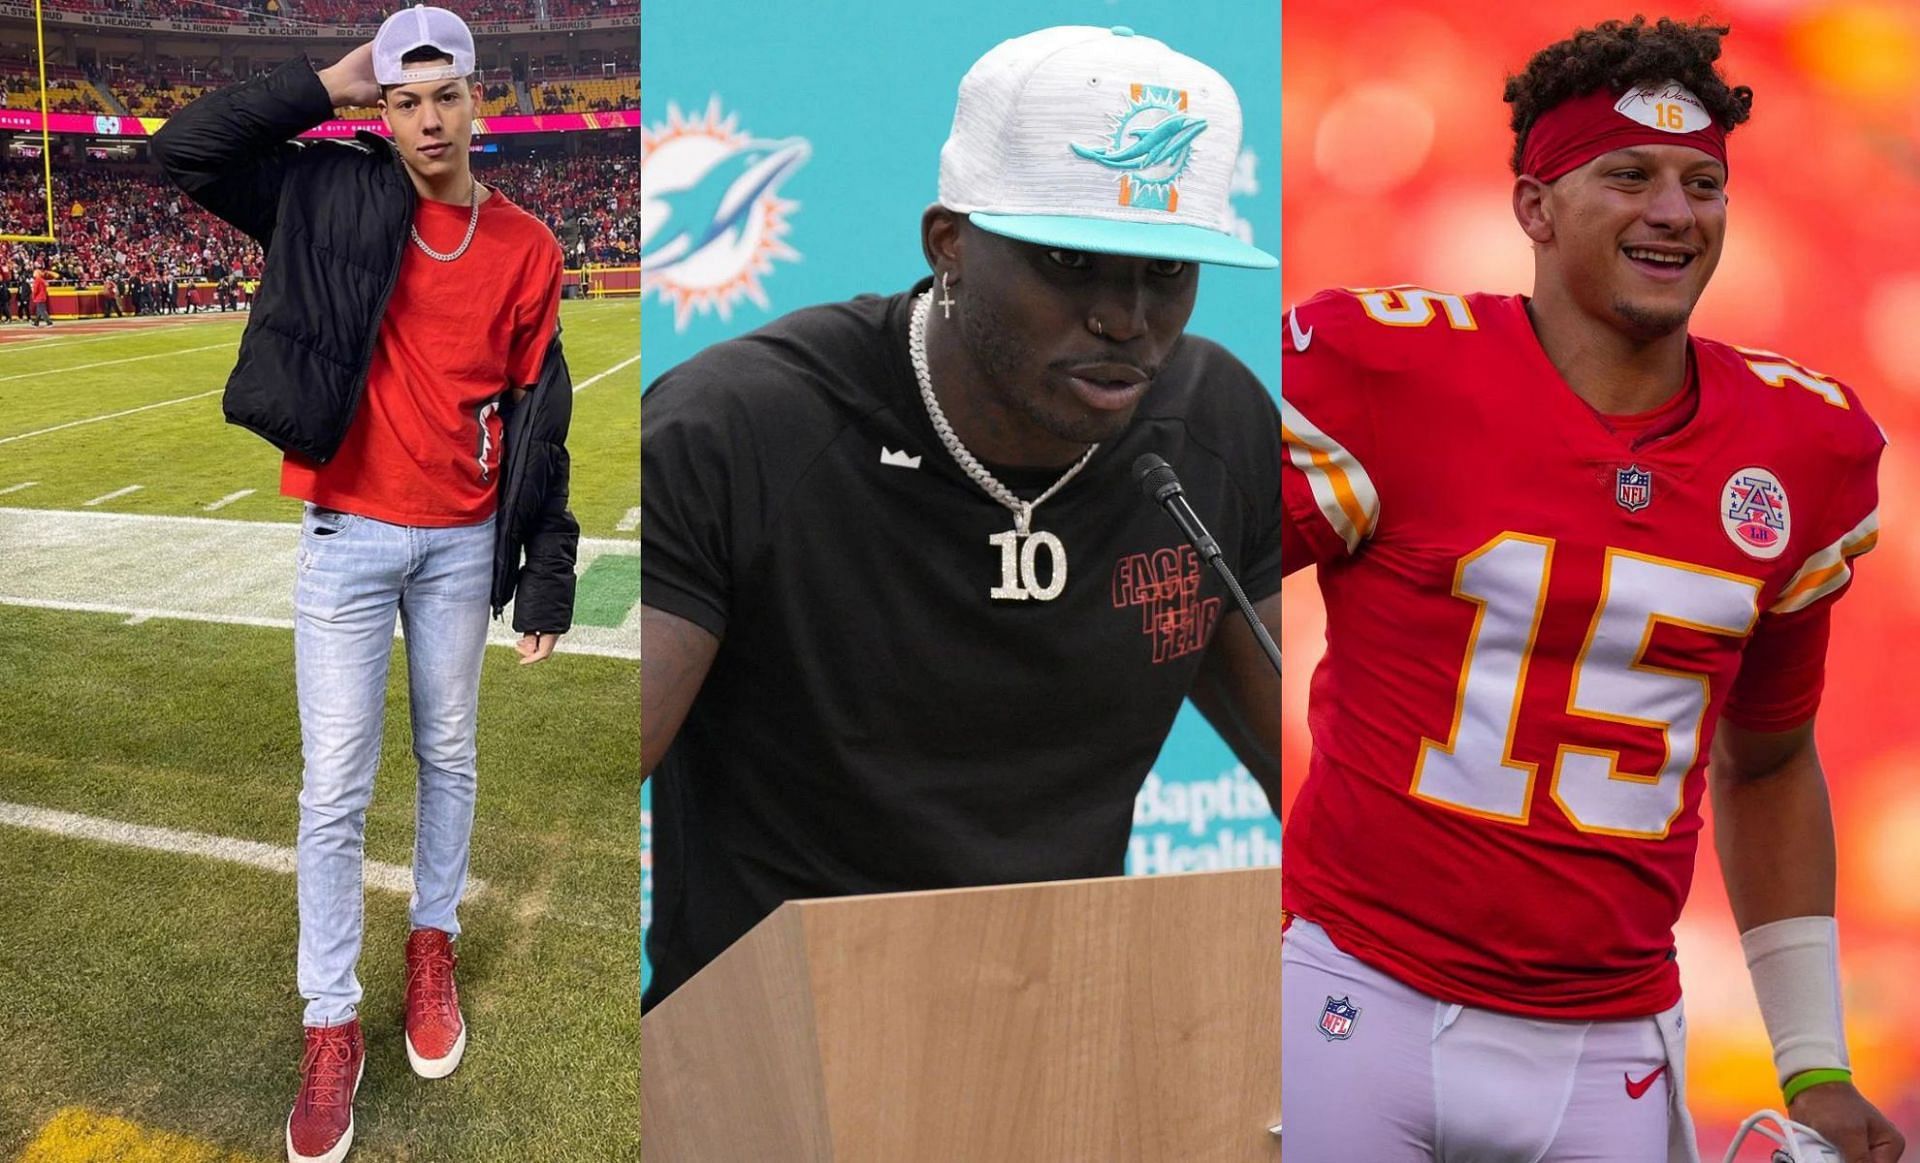 NFL fans come to Jackson Mahomes